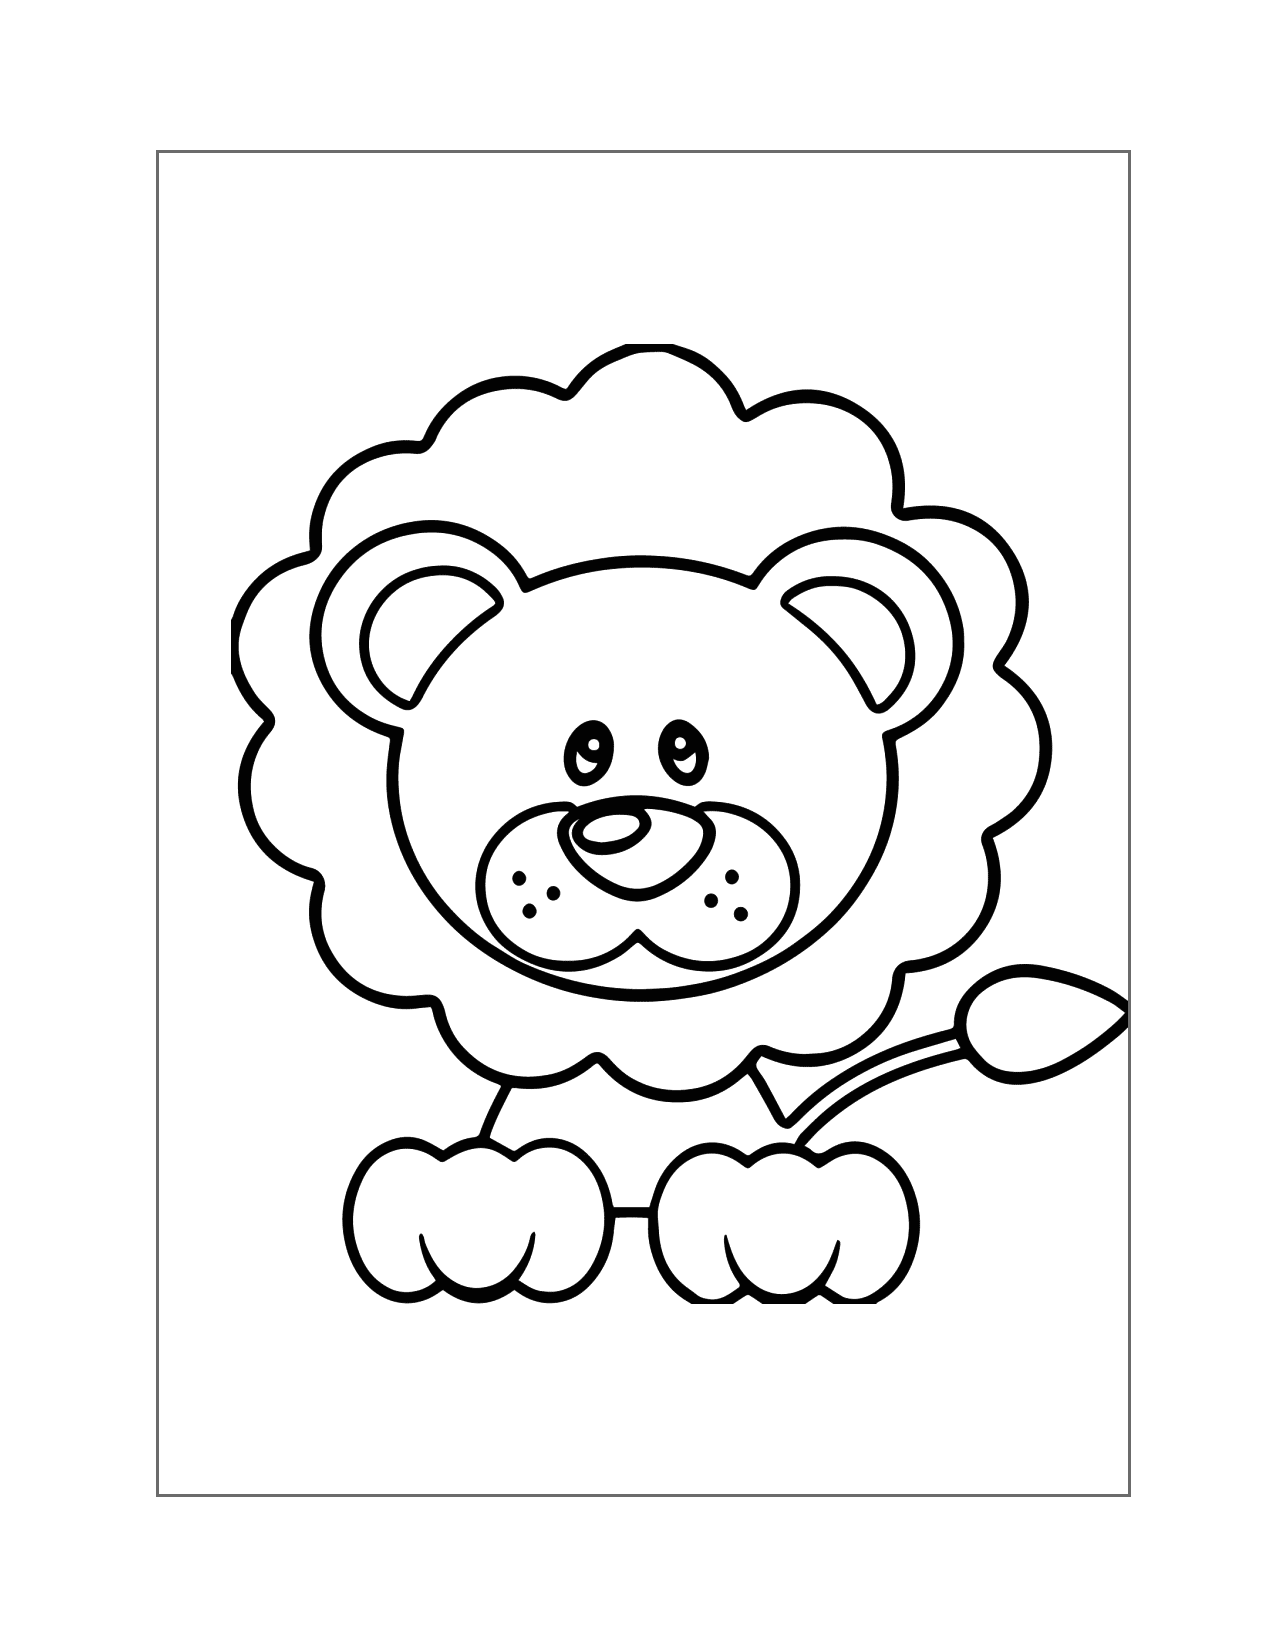 Cute Cartoon Lion Coloring Page